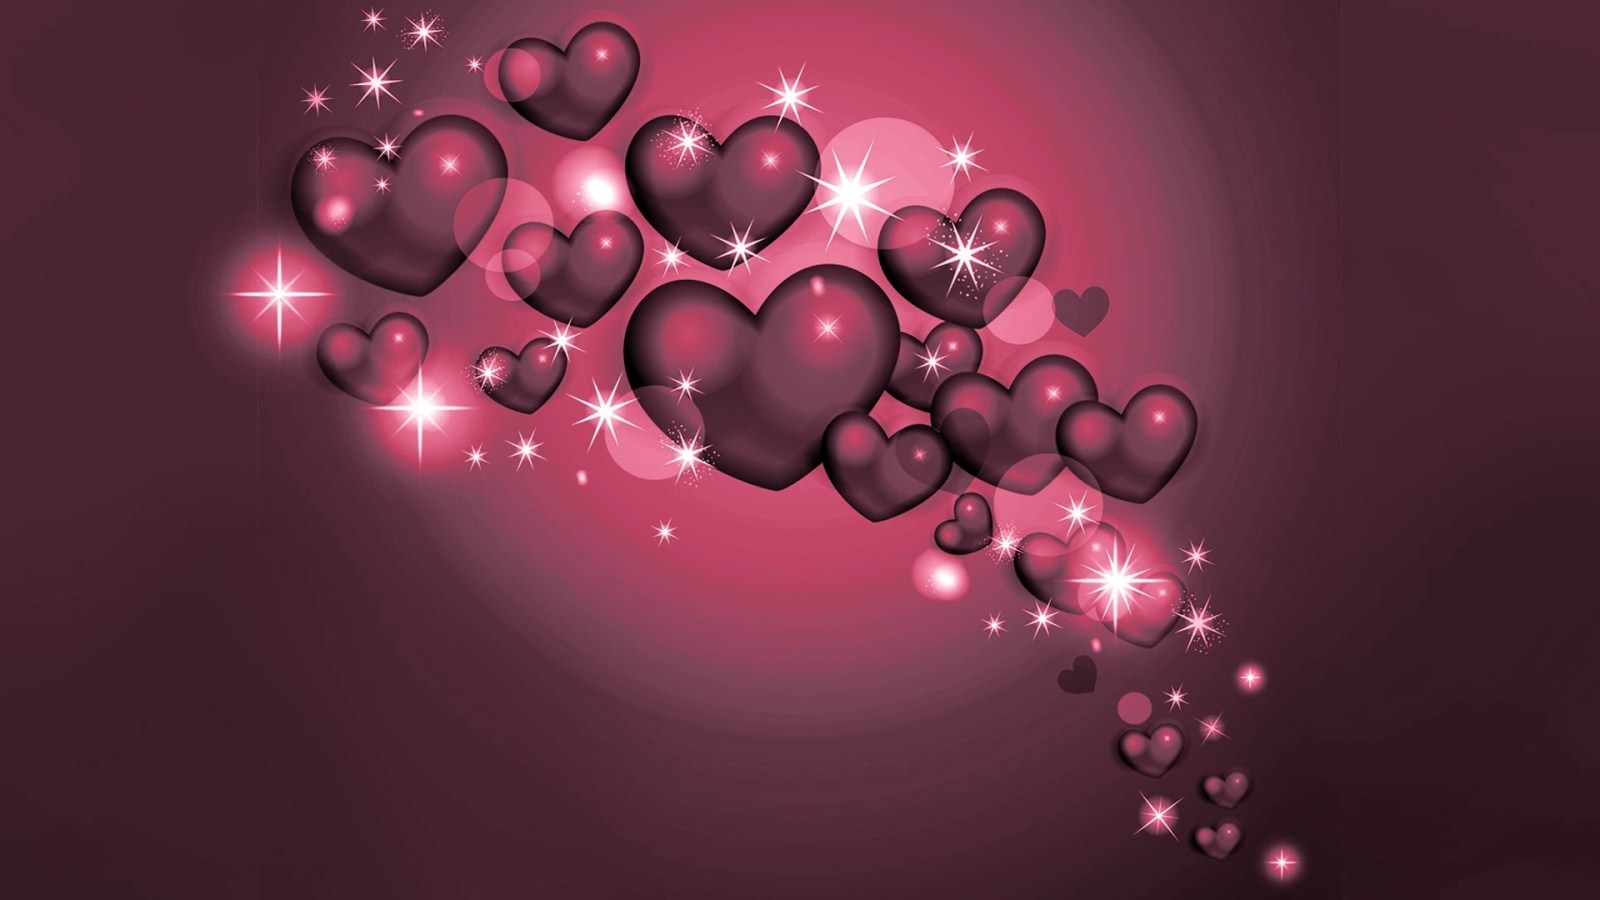 Free download love heart 3d hd wallpapers 1080p free download ...